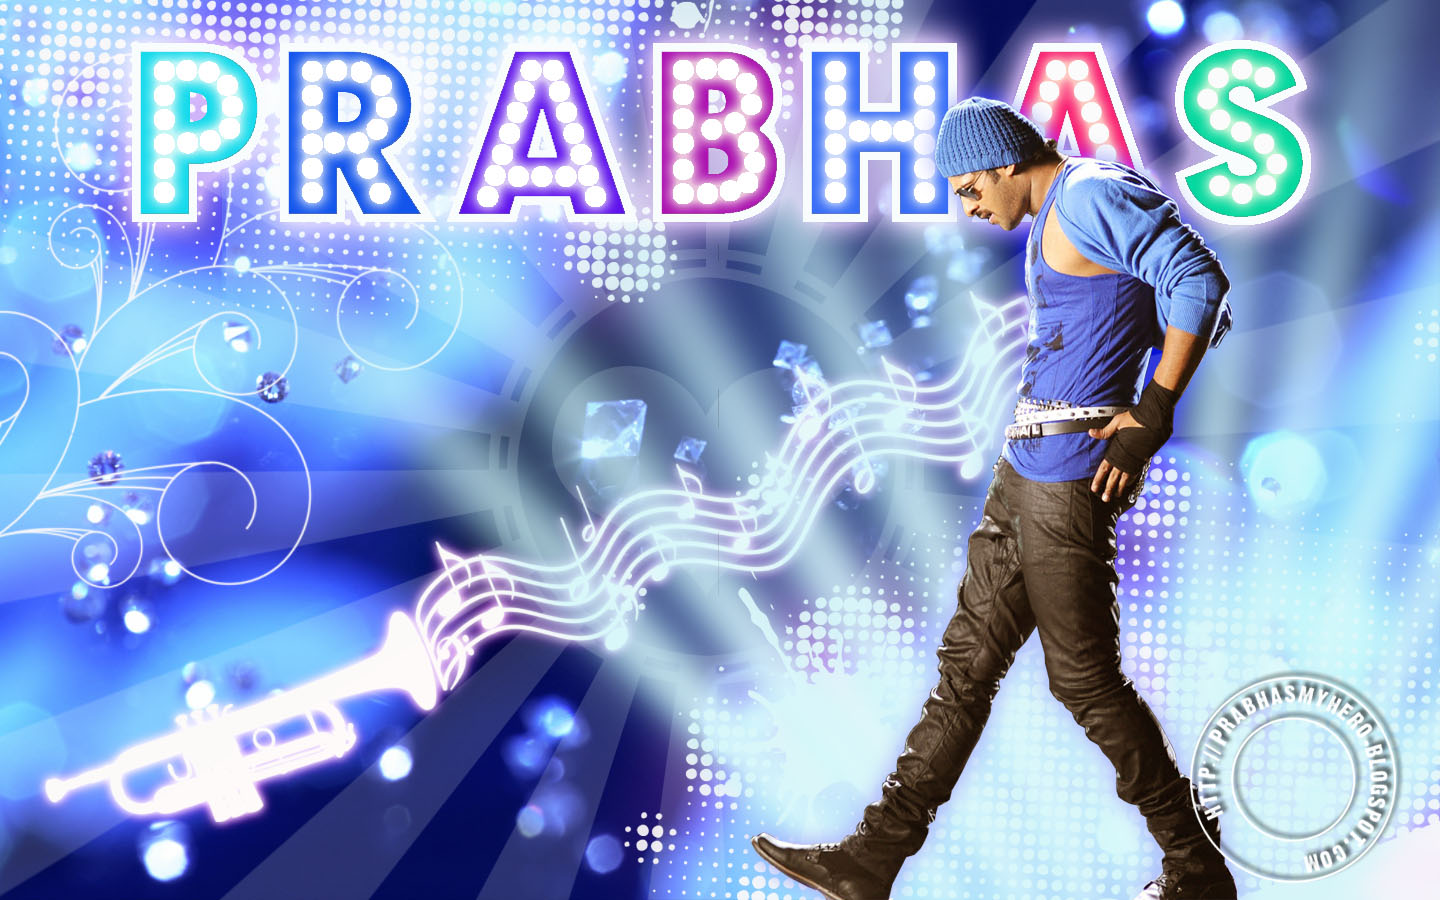 Prabhas Wide Screen Wallpapers. Posted By: Suresh Varma on Tuesday, June 15, 